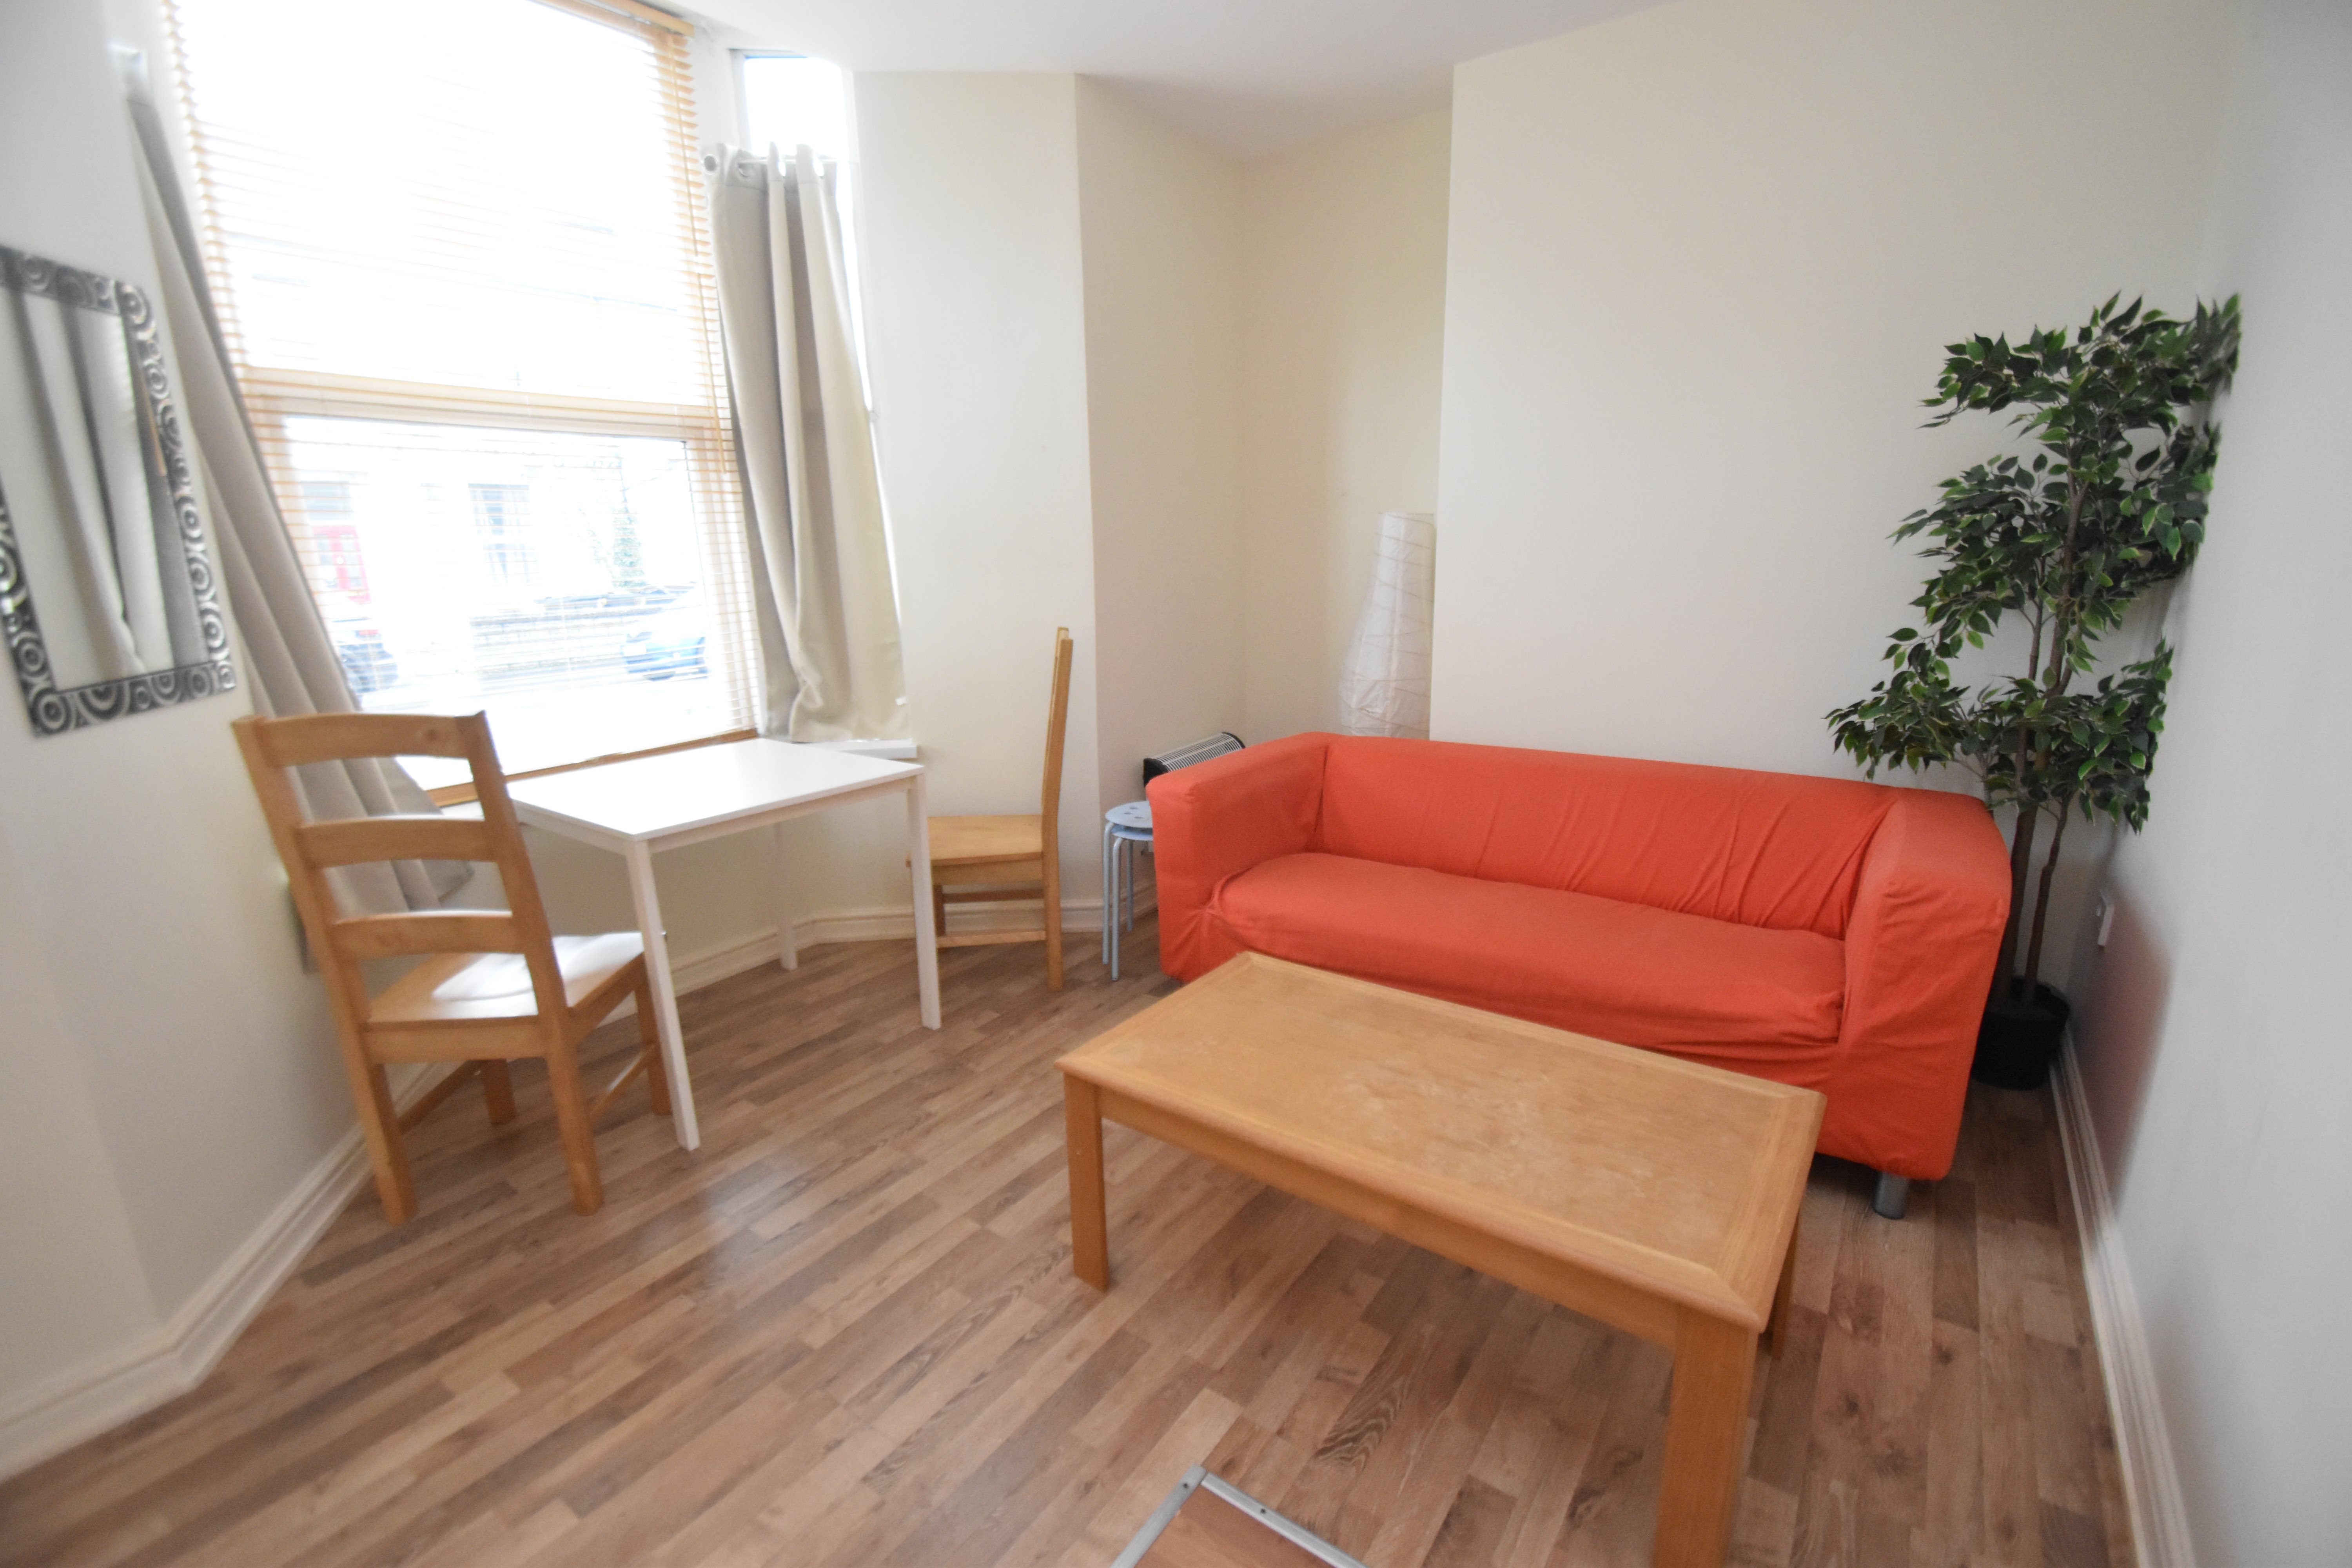 1 bed flat to rent in Piercefield Place, ADAMSDOWN 1